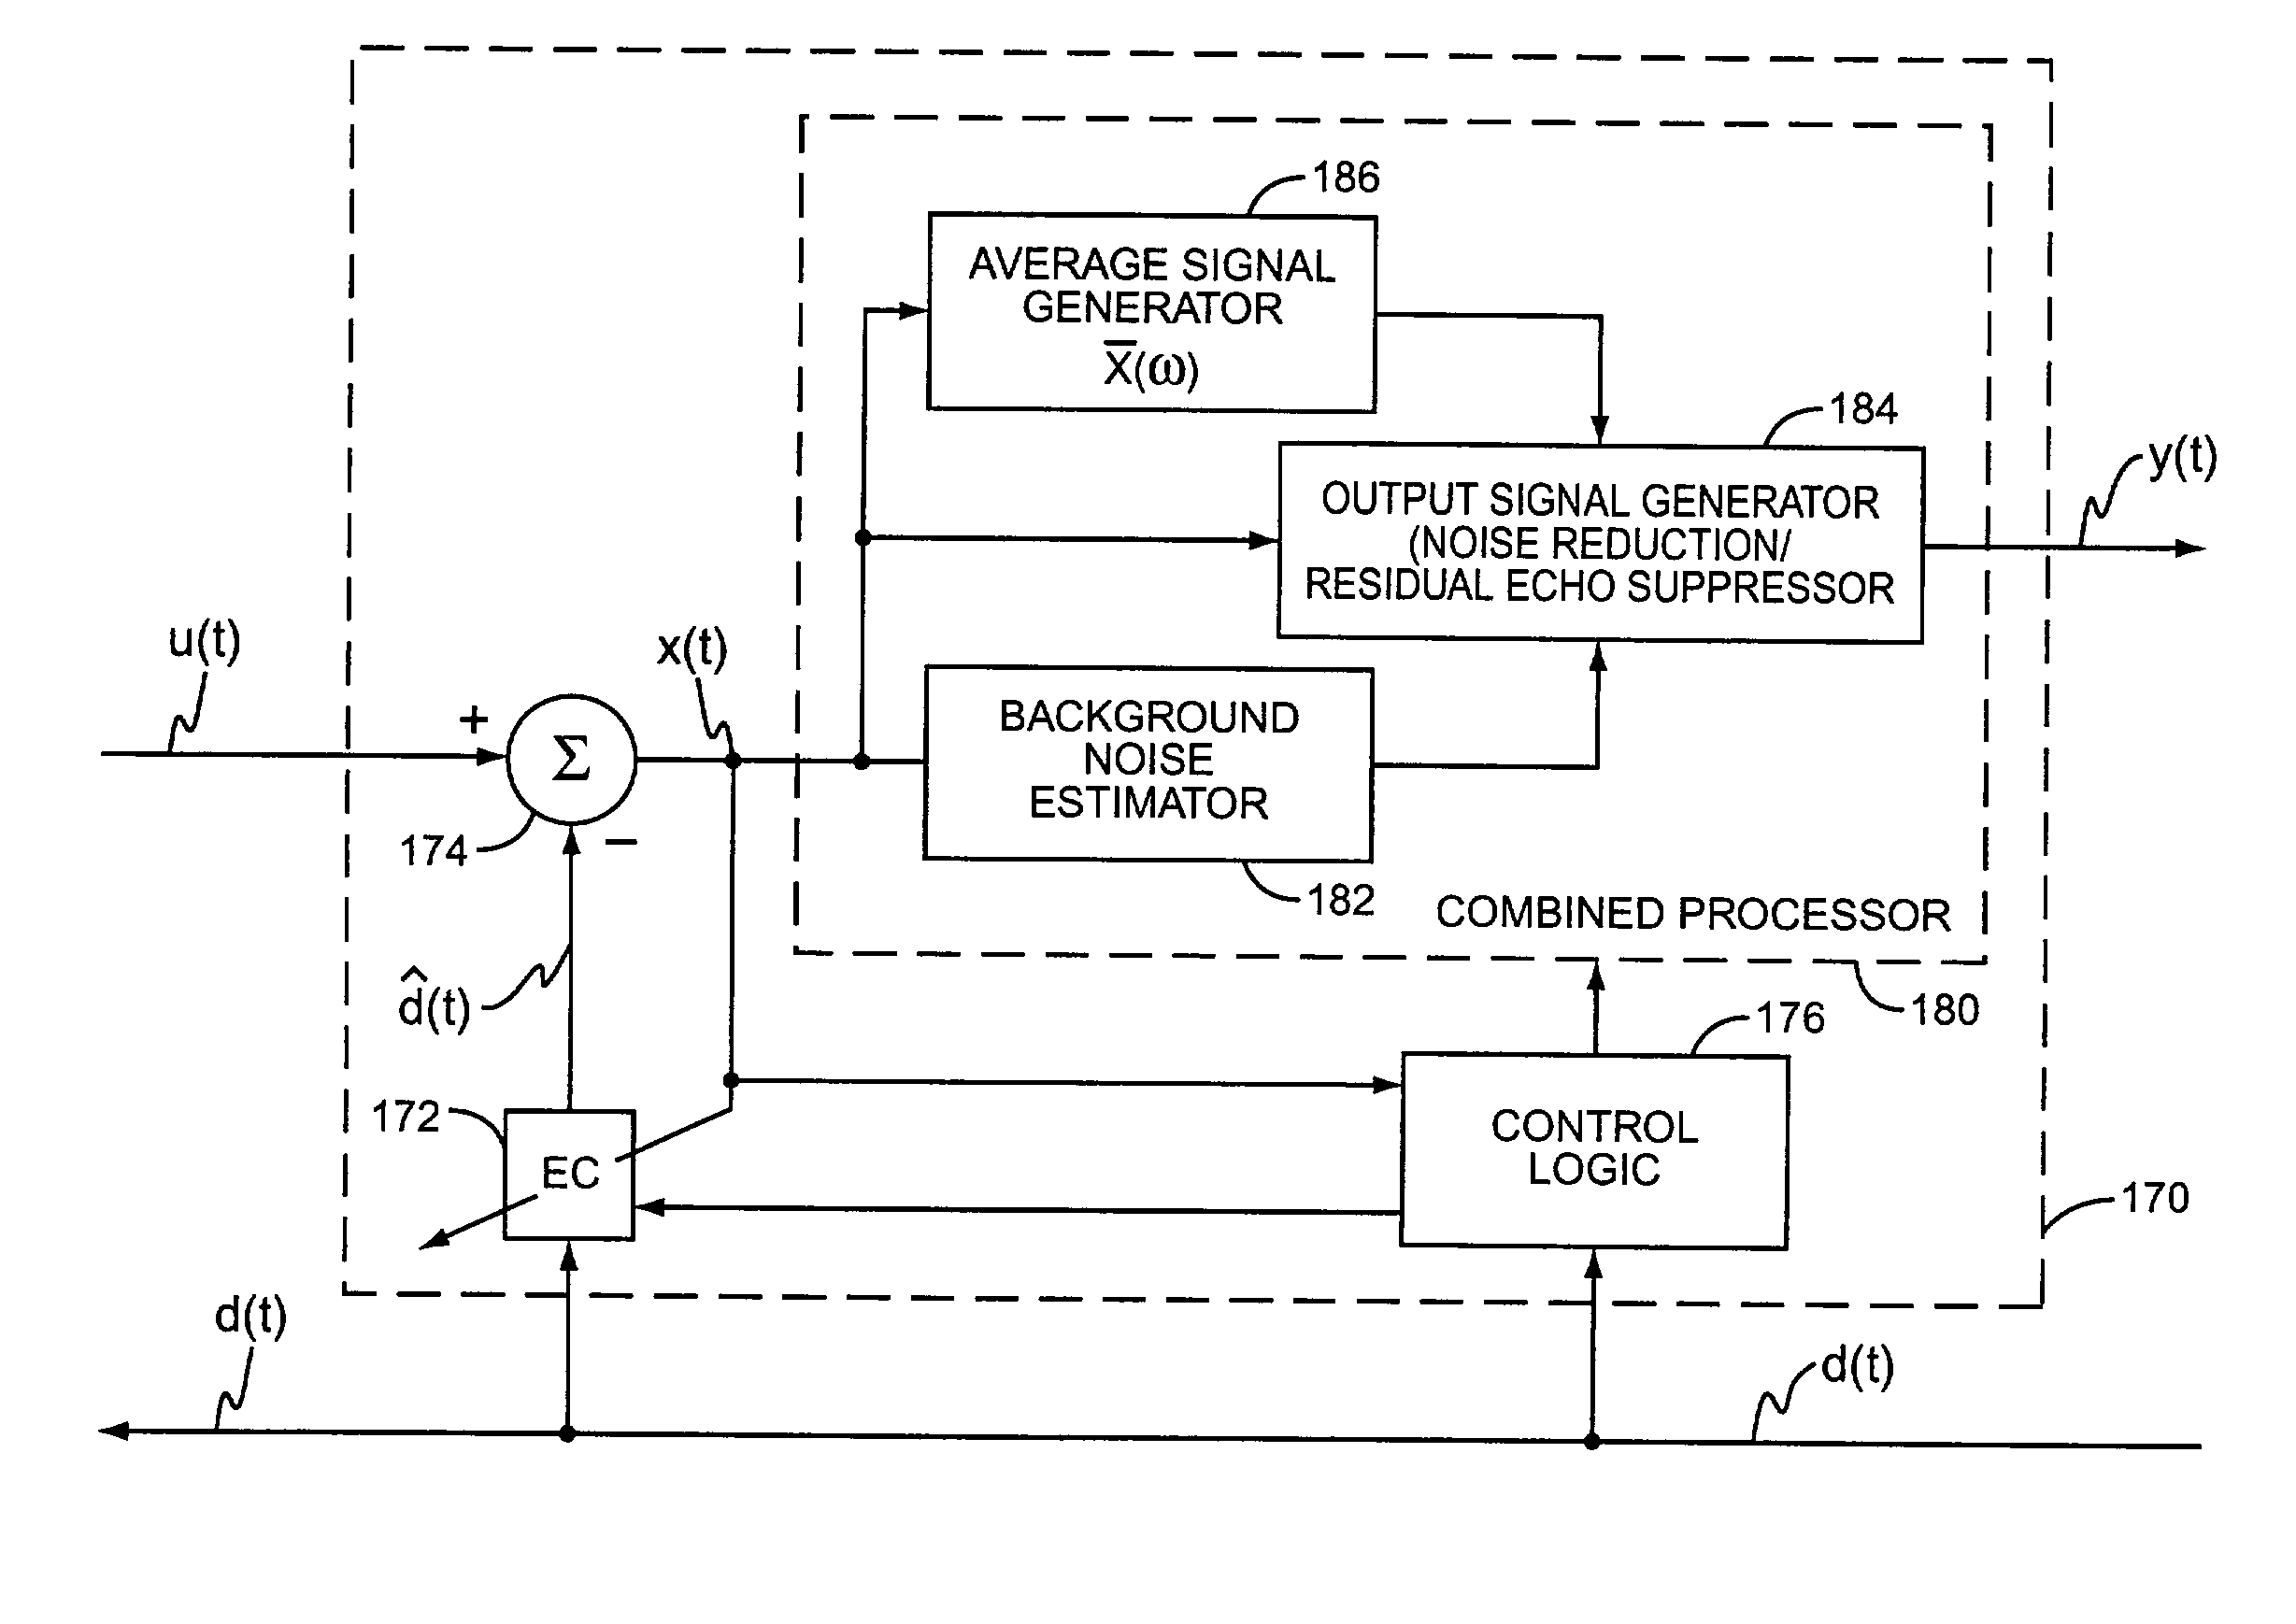 Integrated noise cancellation and residual echo suppression